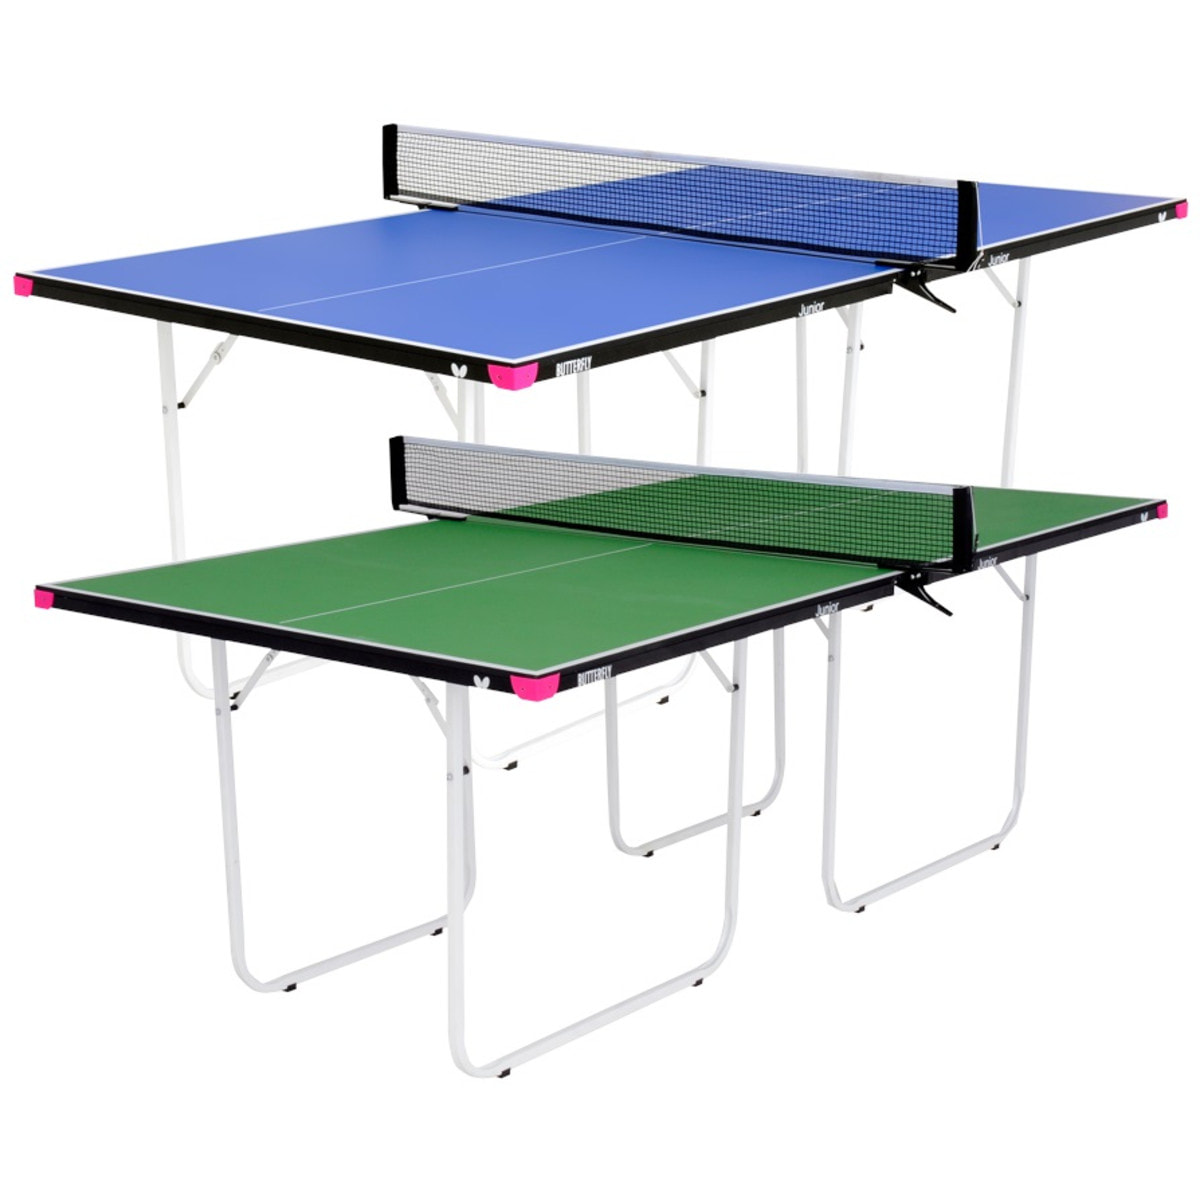 Junior Table Tennis Set With Foldable Table 48in, Five Below